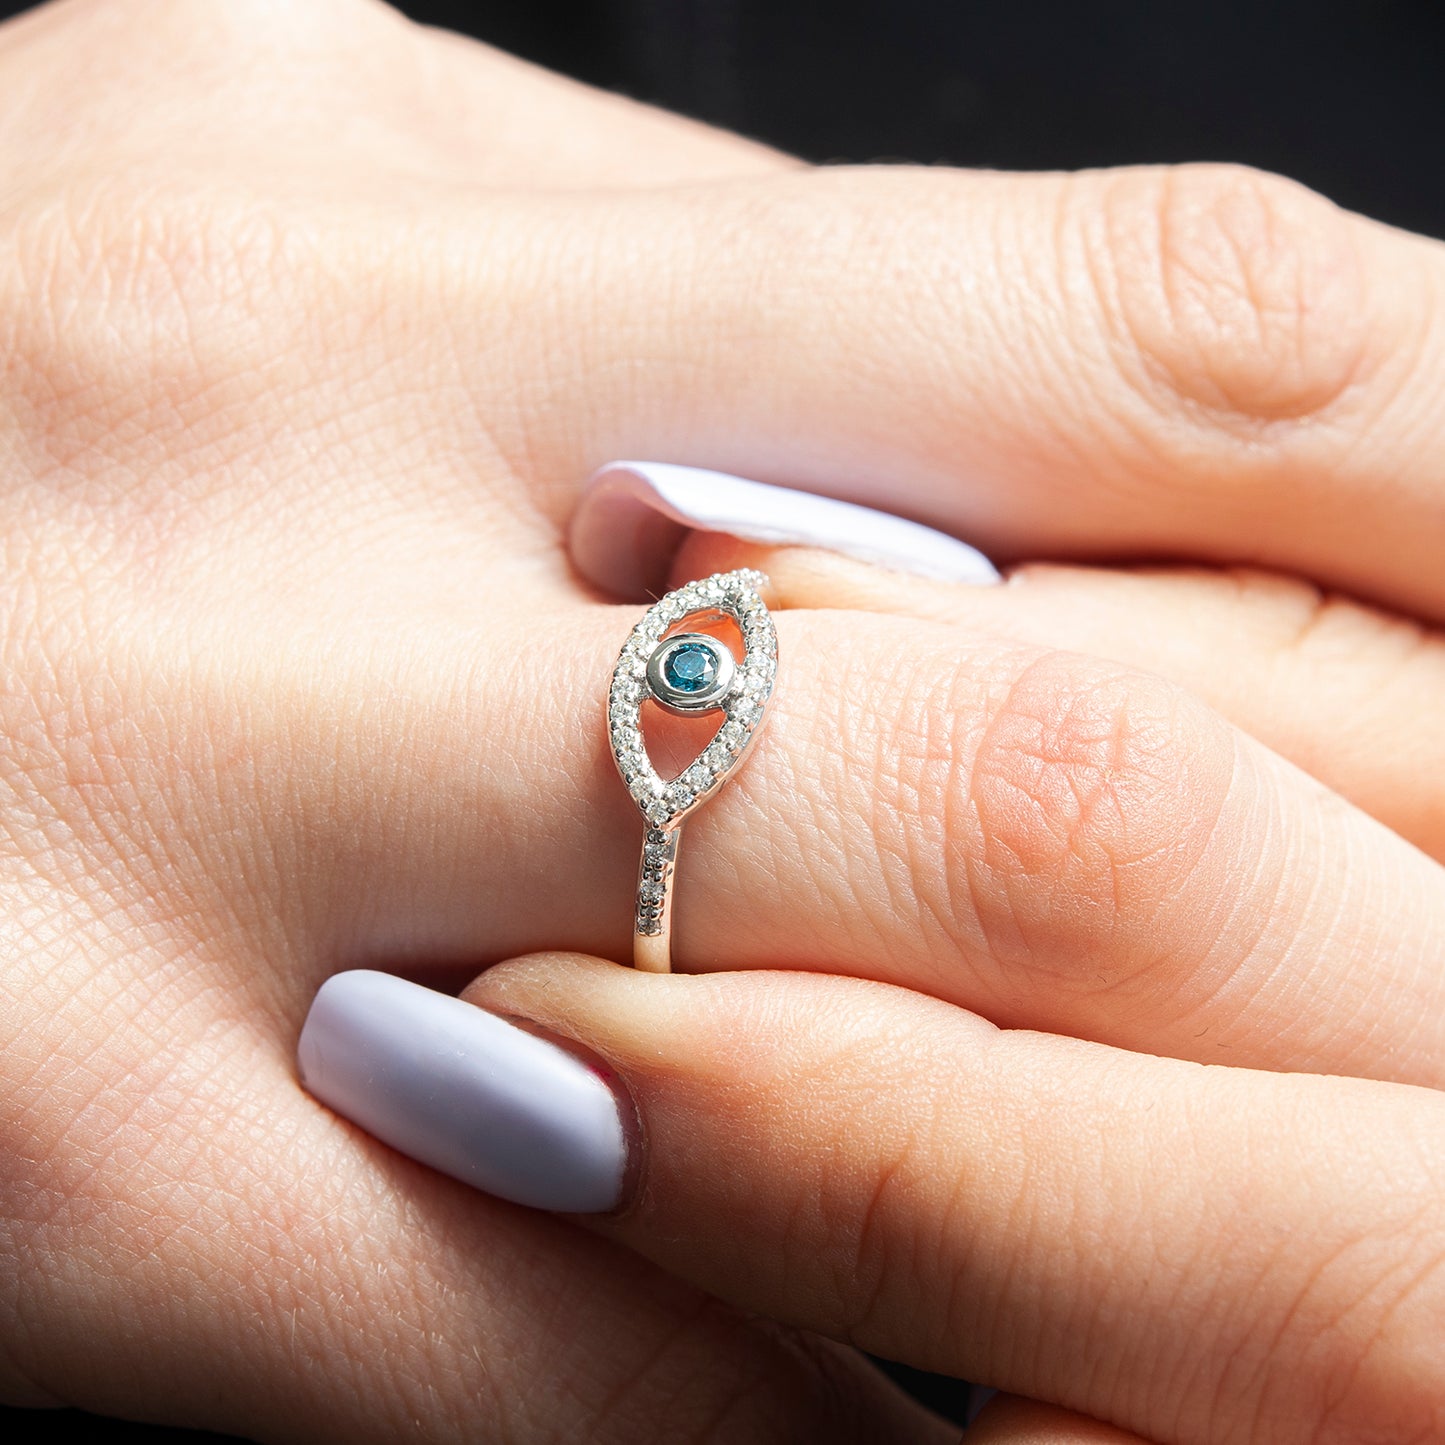 Rubyn Evil Eye Ring for Hand with Diamonds